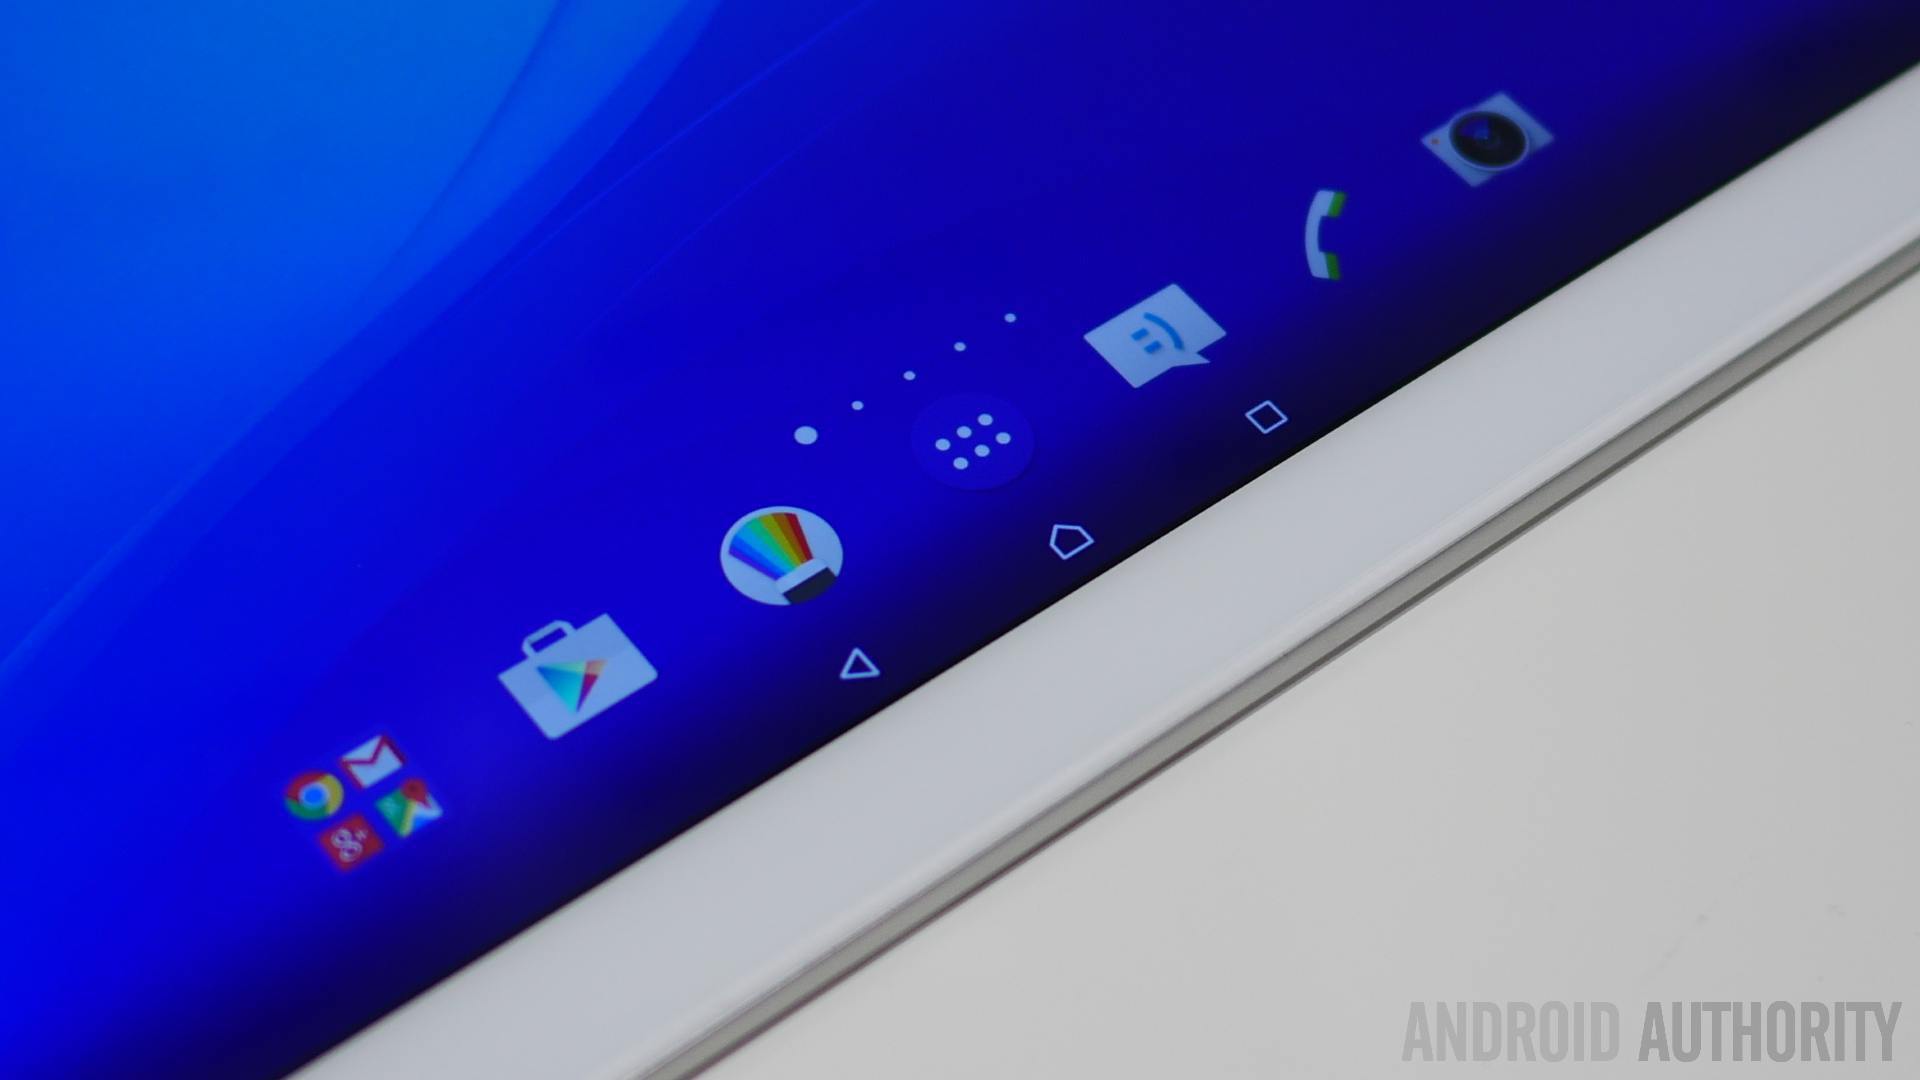 Sony Xperia Z4 Tablet First Look